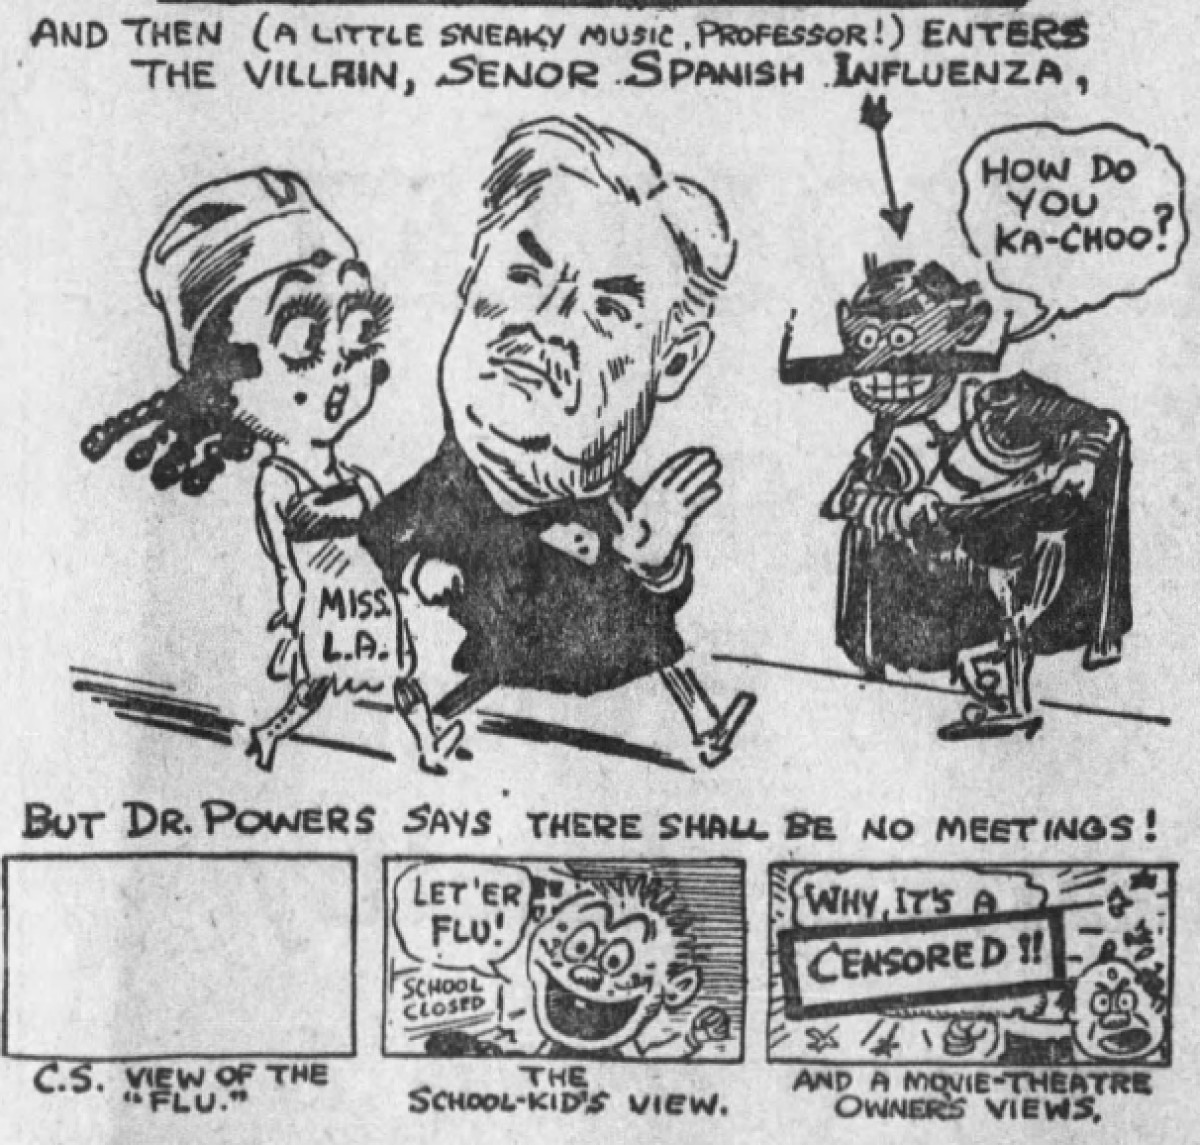 A cartoon published in the Oct. 12, 1918, edition of the L.A. Times mocks the decision by Los Angeles City Health Commissioner Luther M. Powers to shut down public spaces to limit spread of Spanish flu.